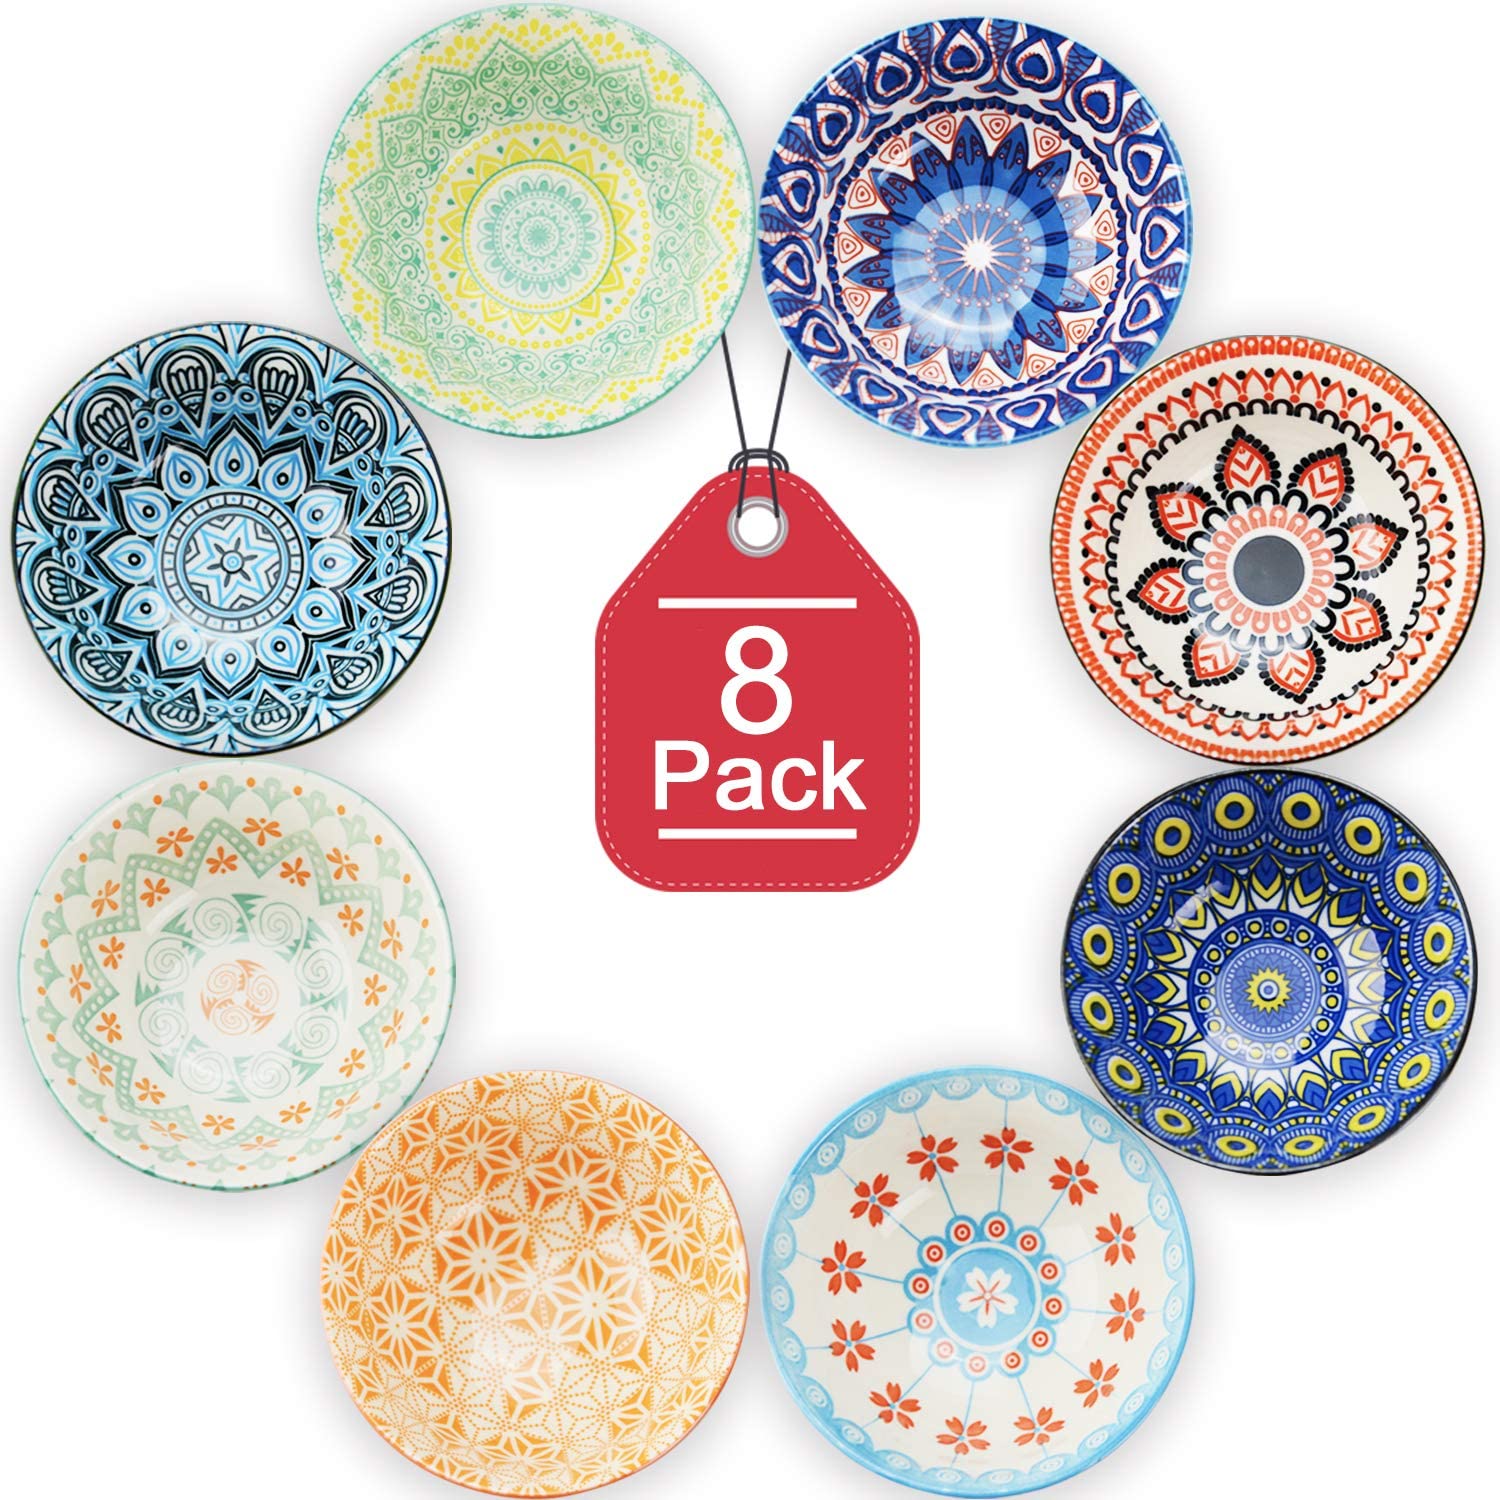 Farielyn-X Assorted Patterns Non-Toxic Rice Bowls, 8-Piece